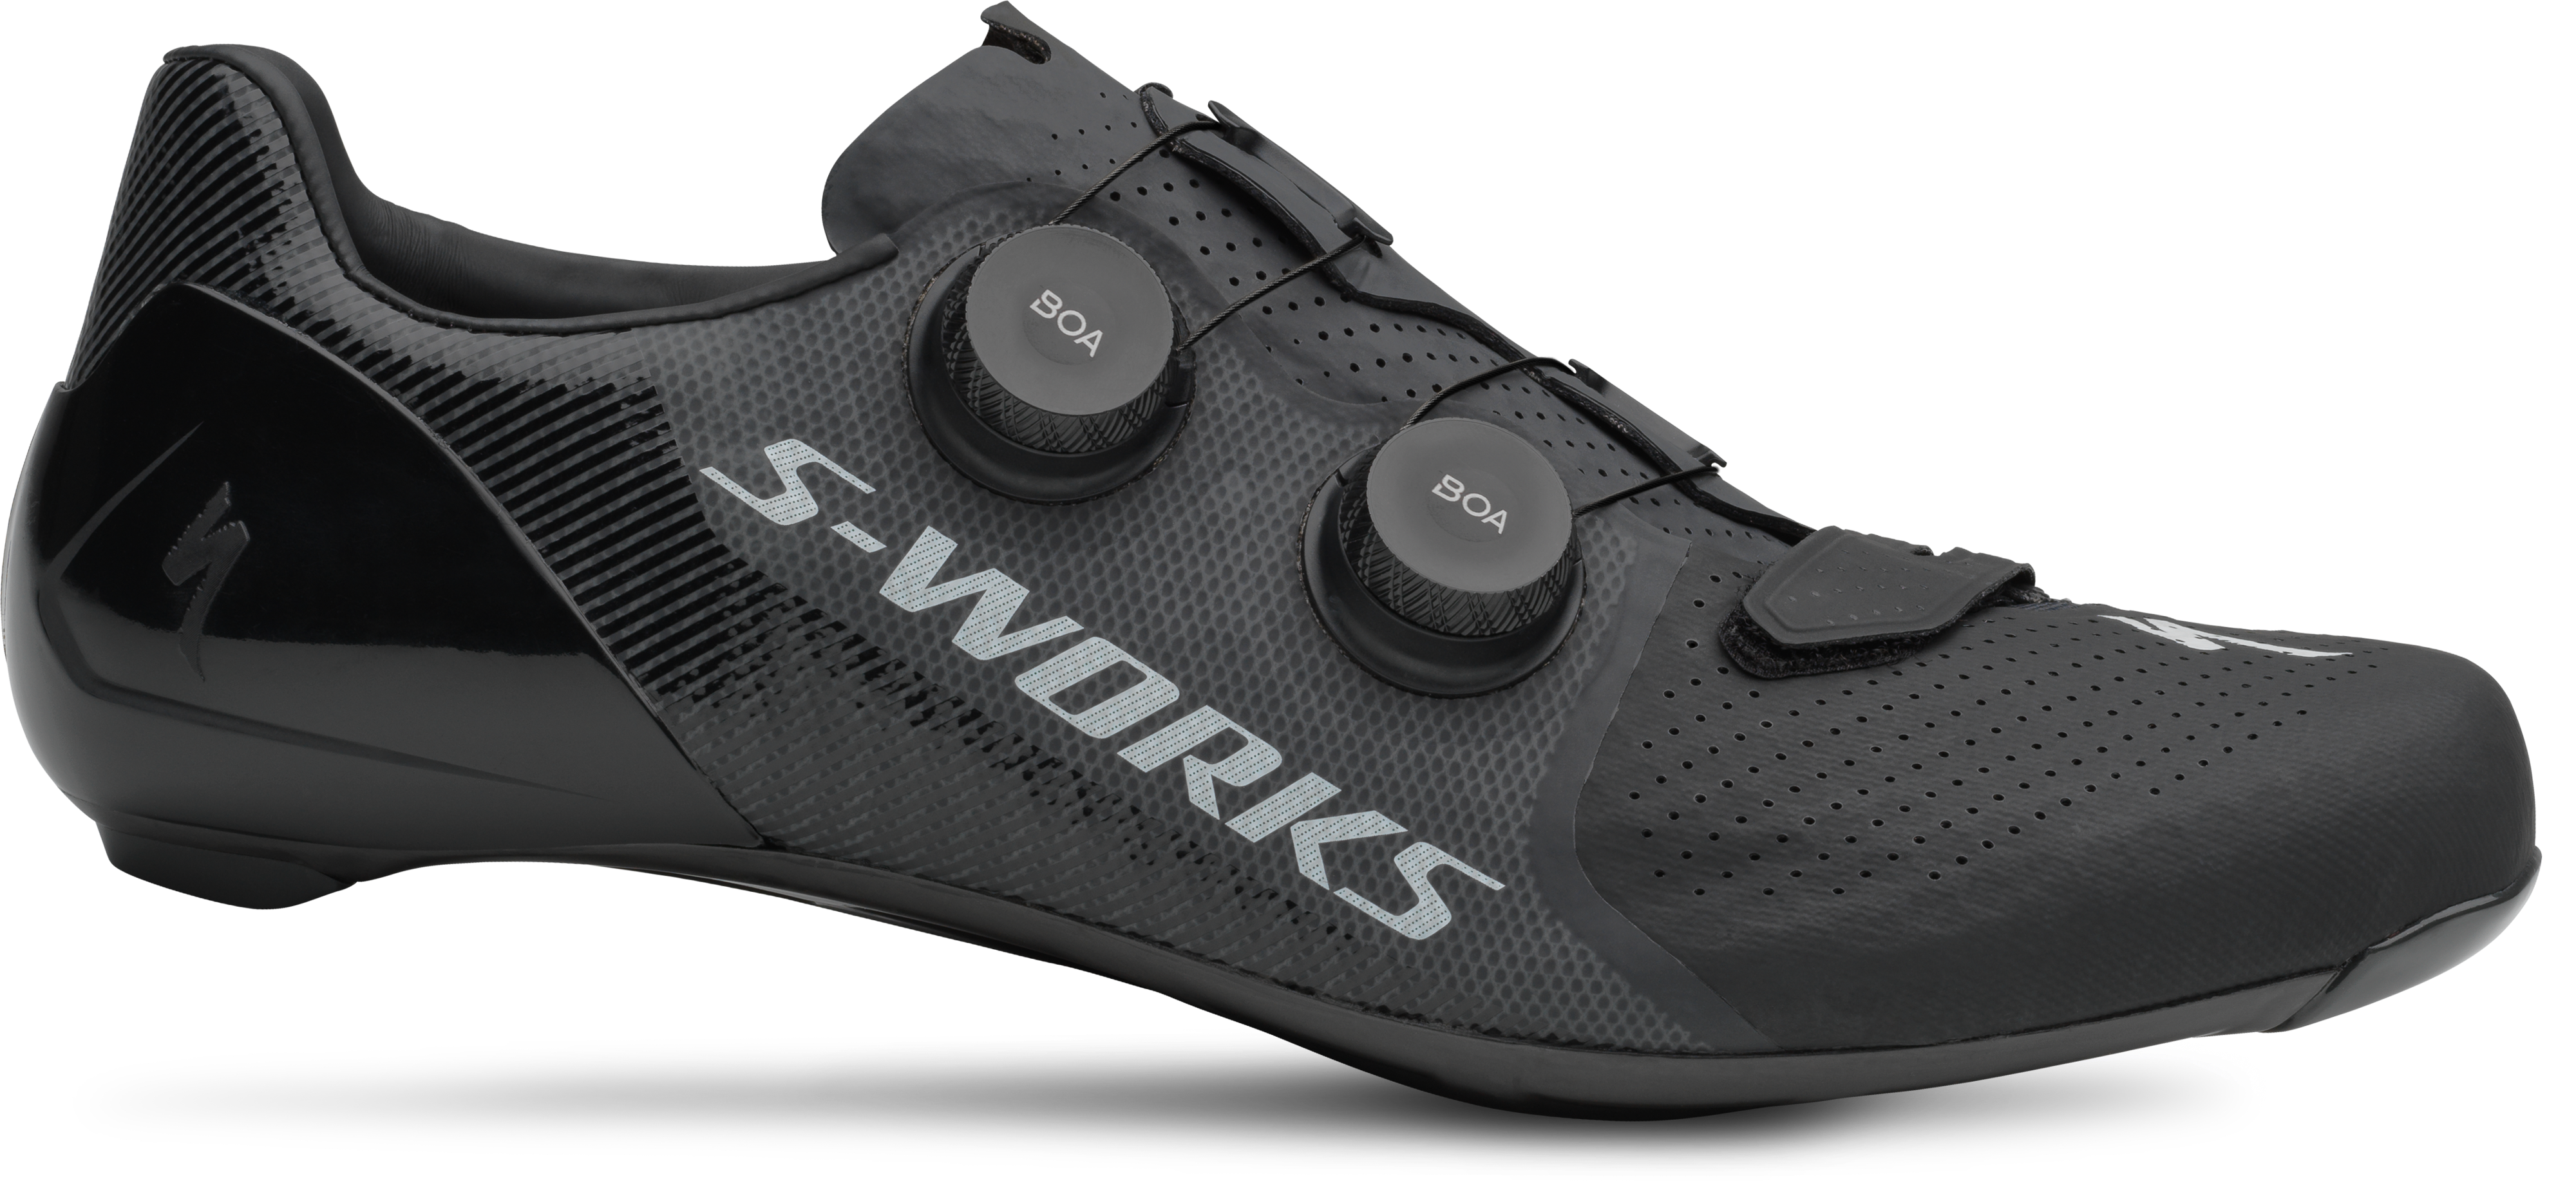 S-Works 7 Road Shoes | Specialized.com